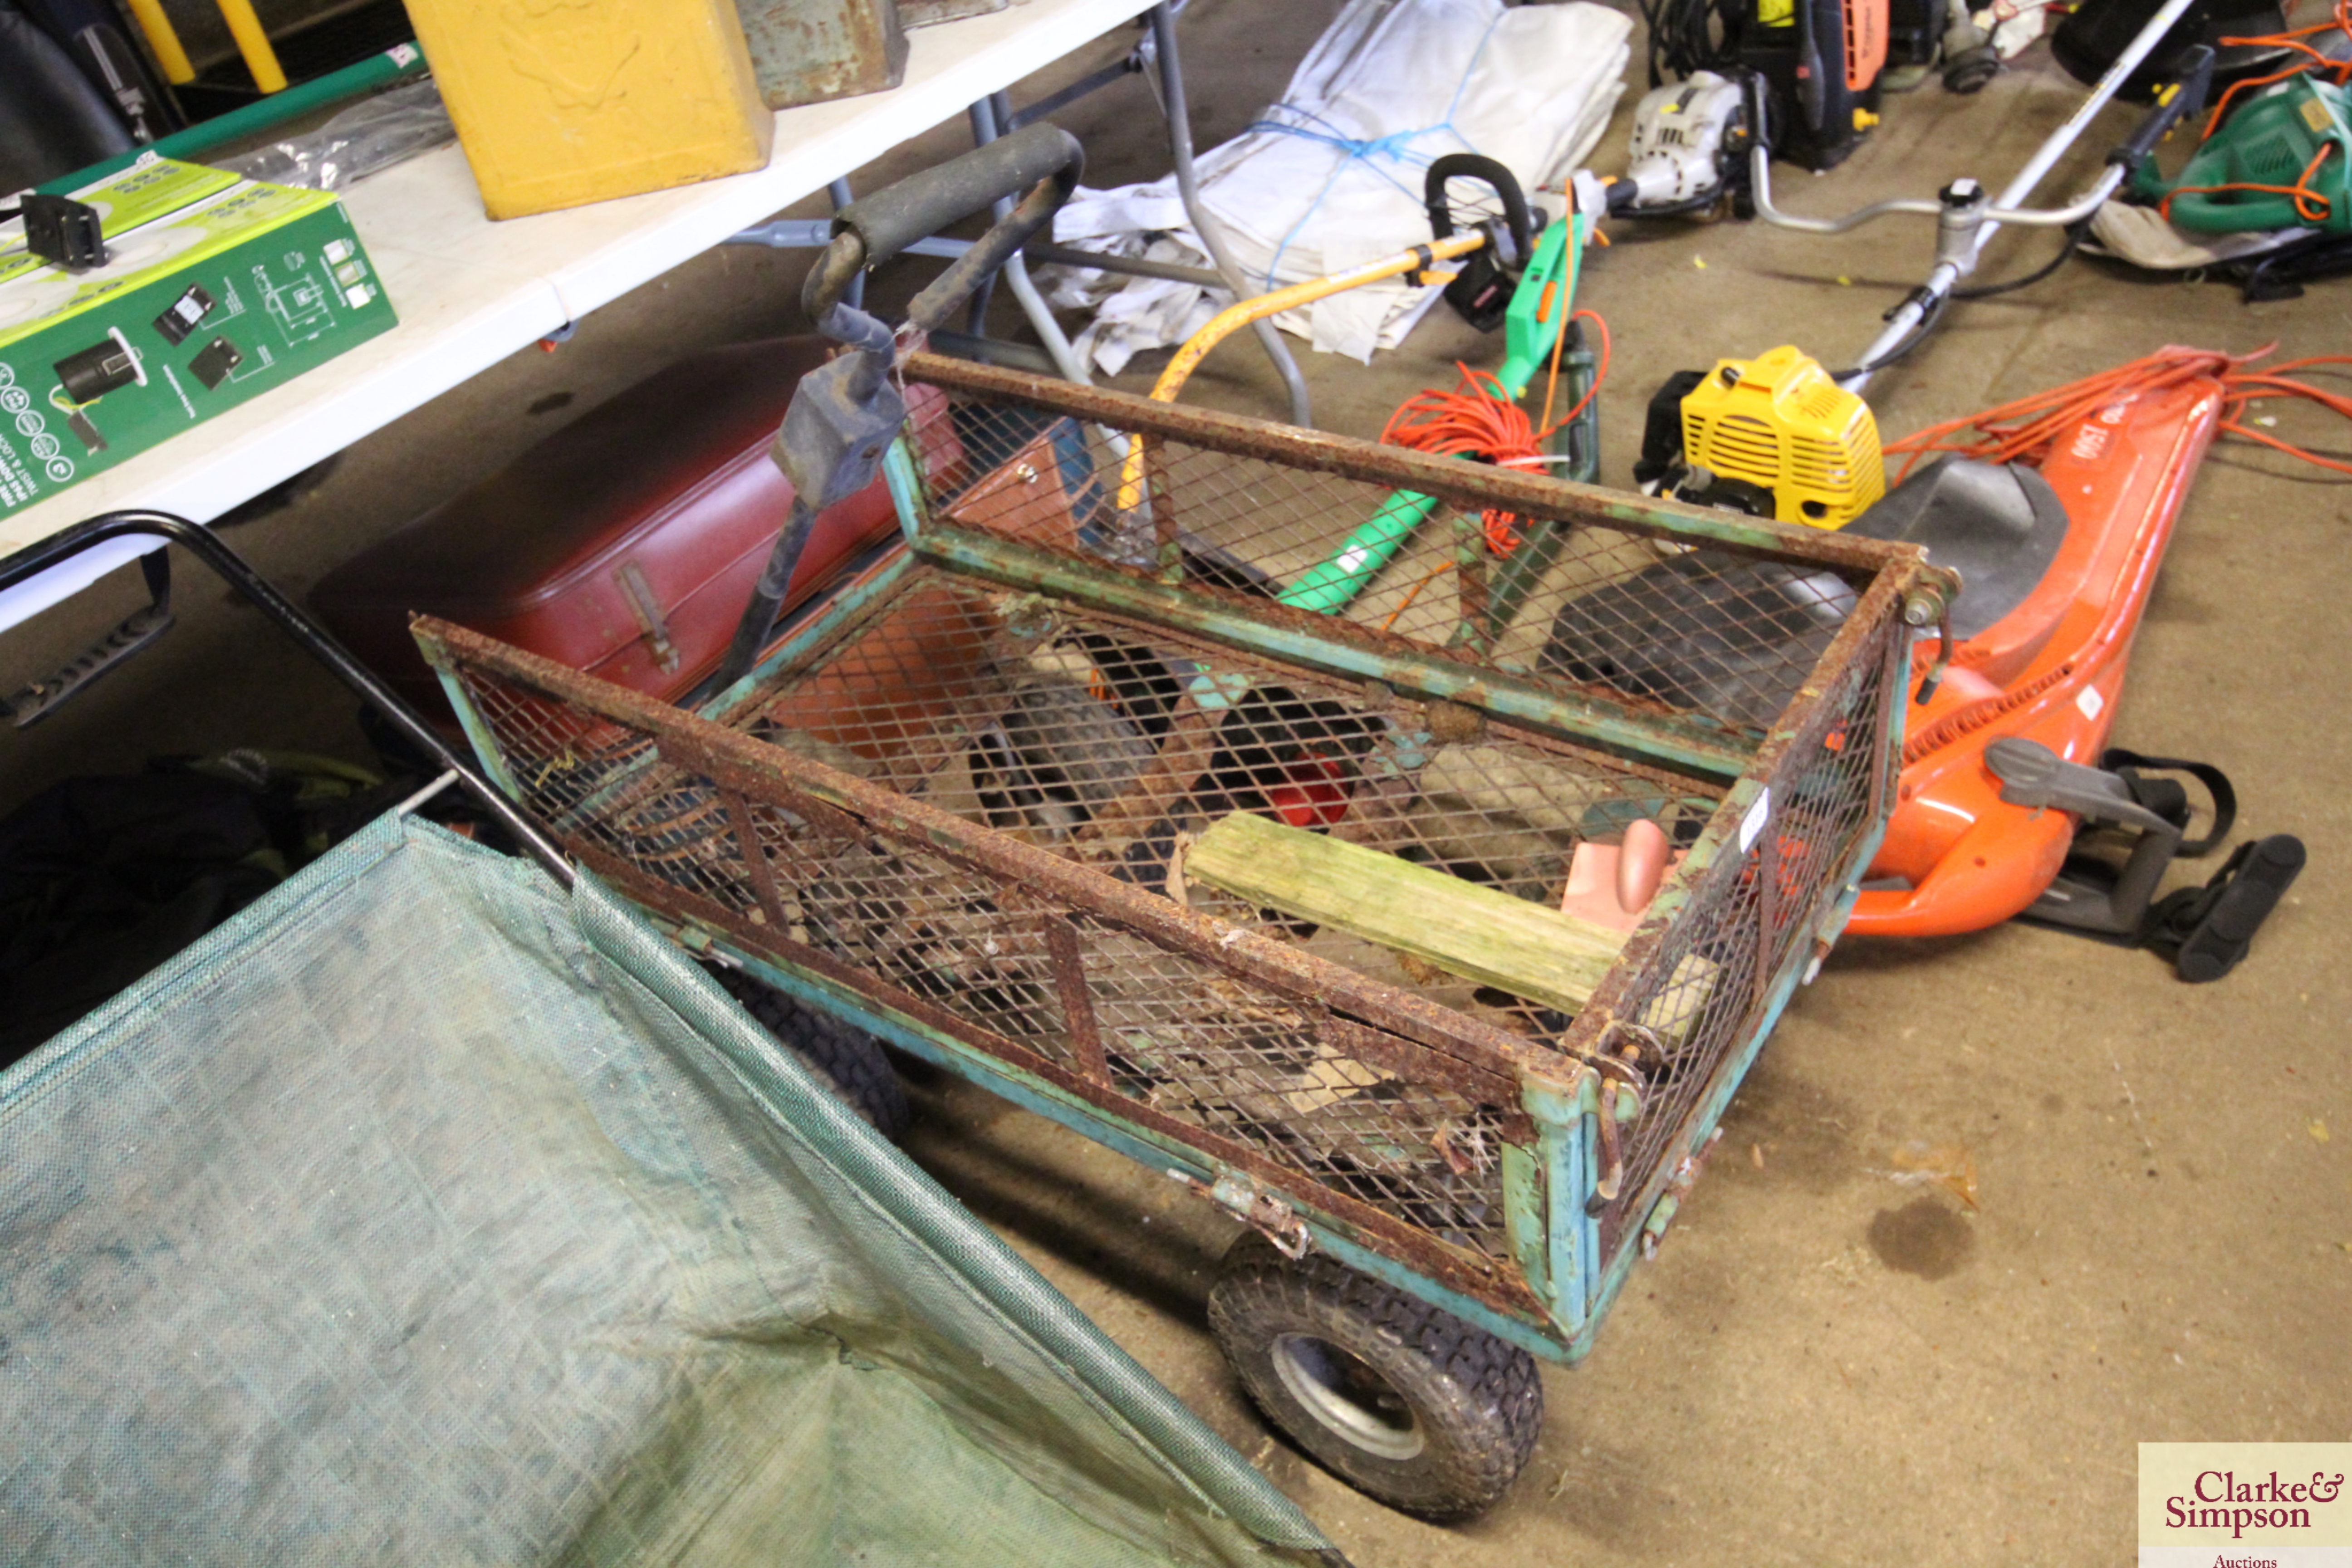 A four wheeled metal garden trolley with drop side